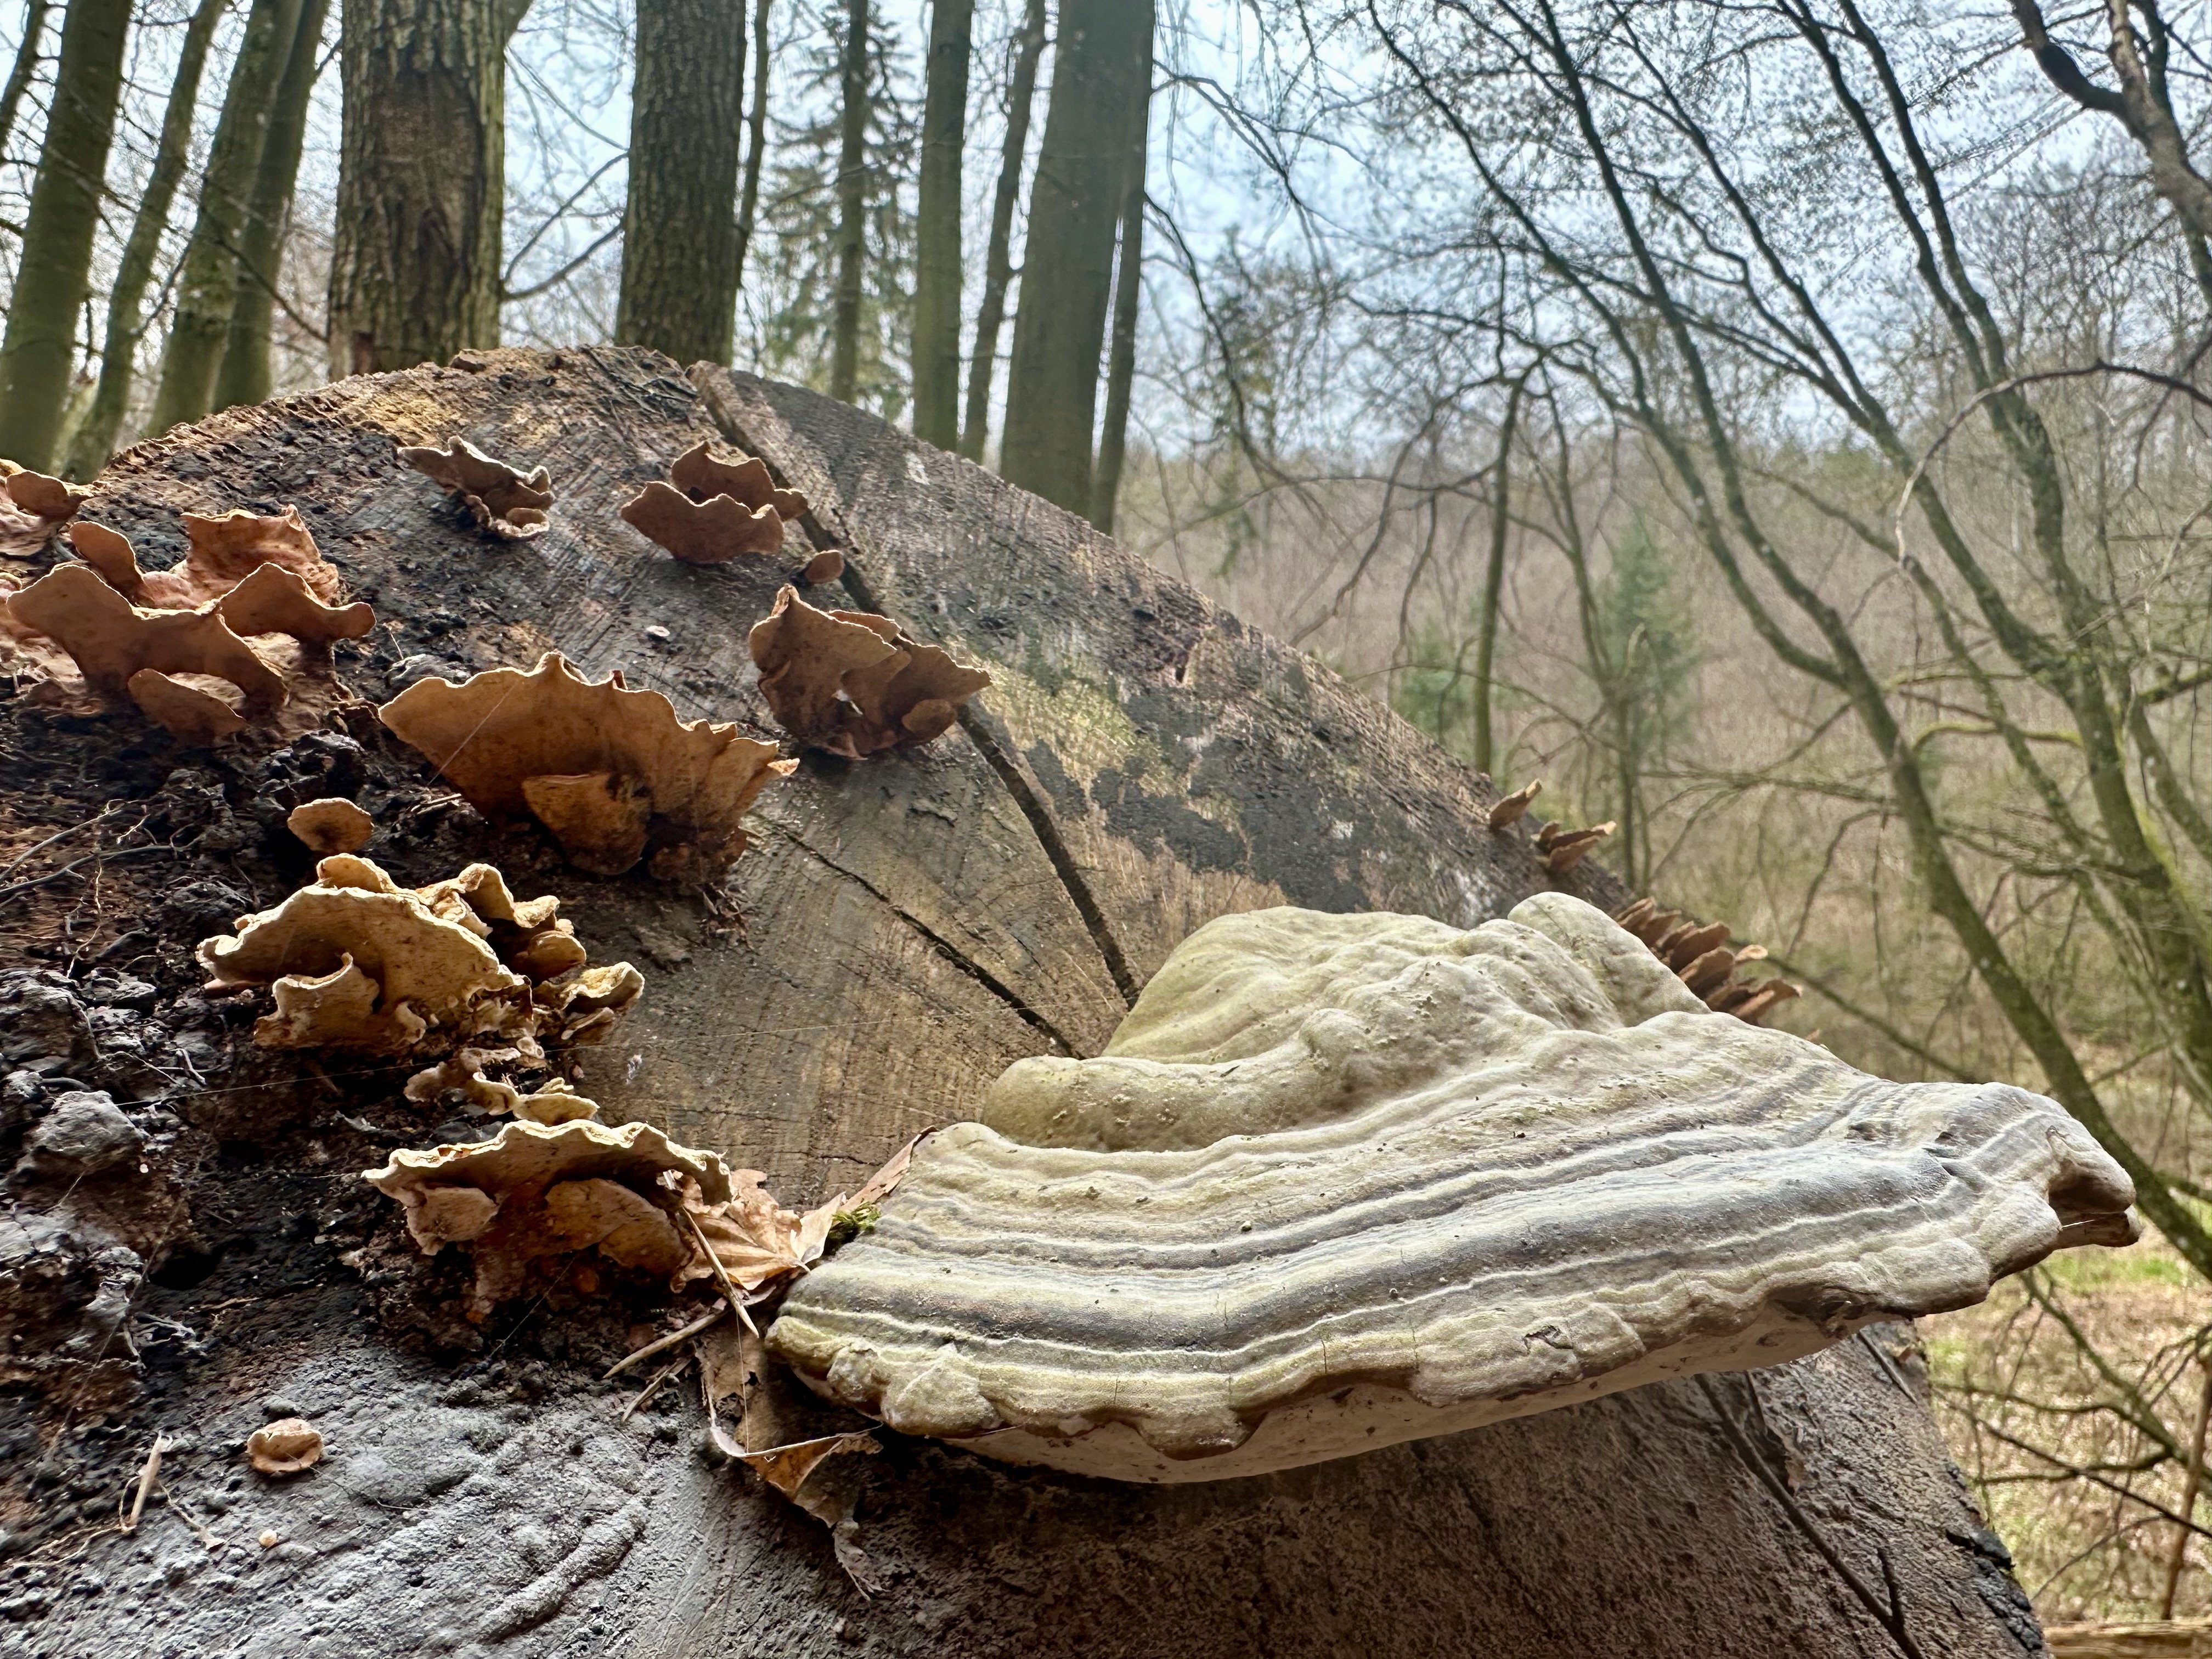 A tree fungus, probably a Trametes sp., on a tree stump in the forest.